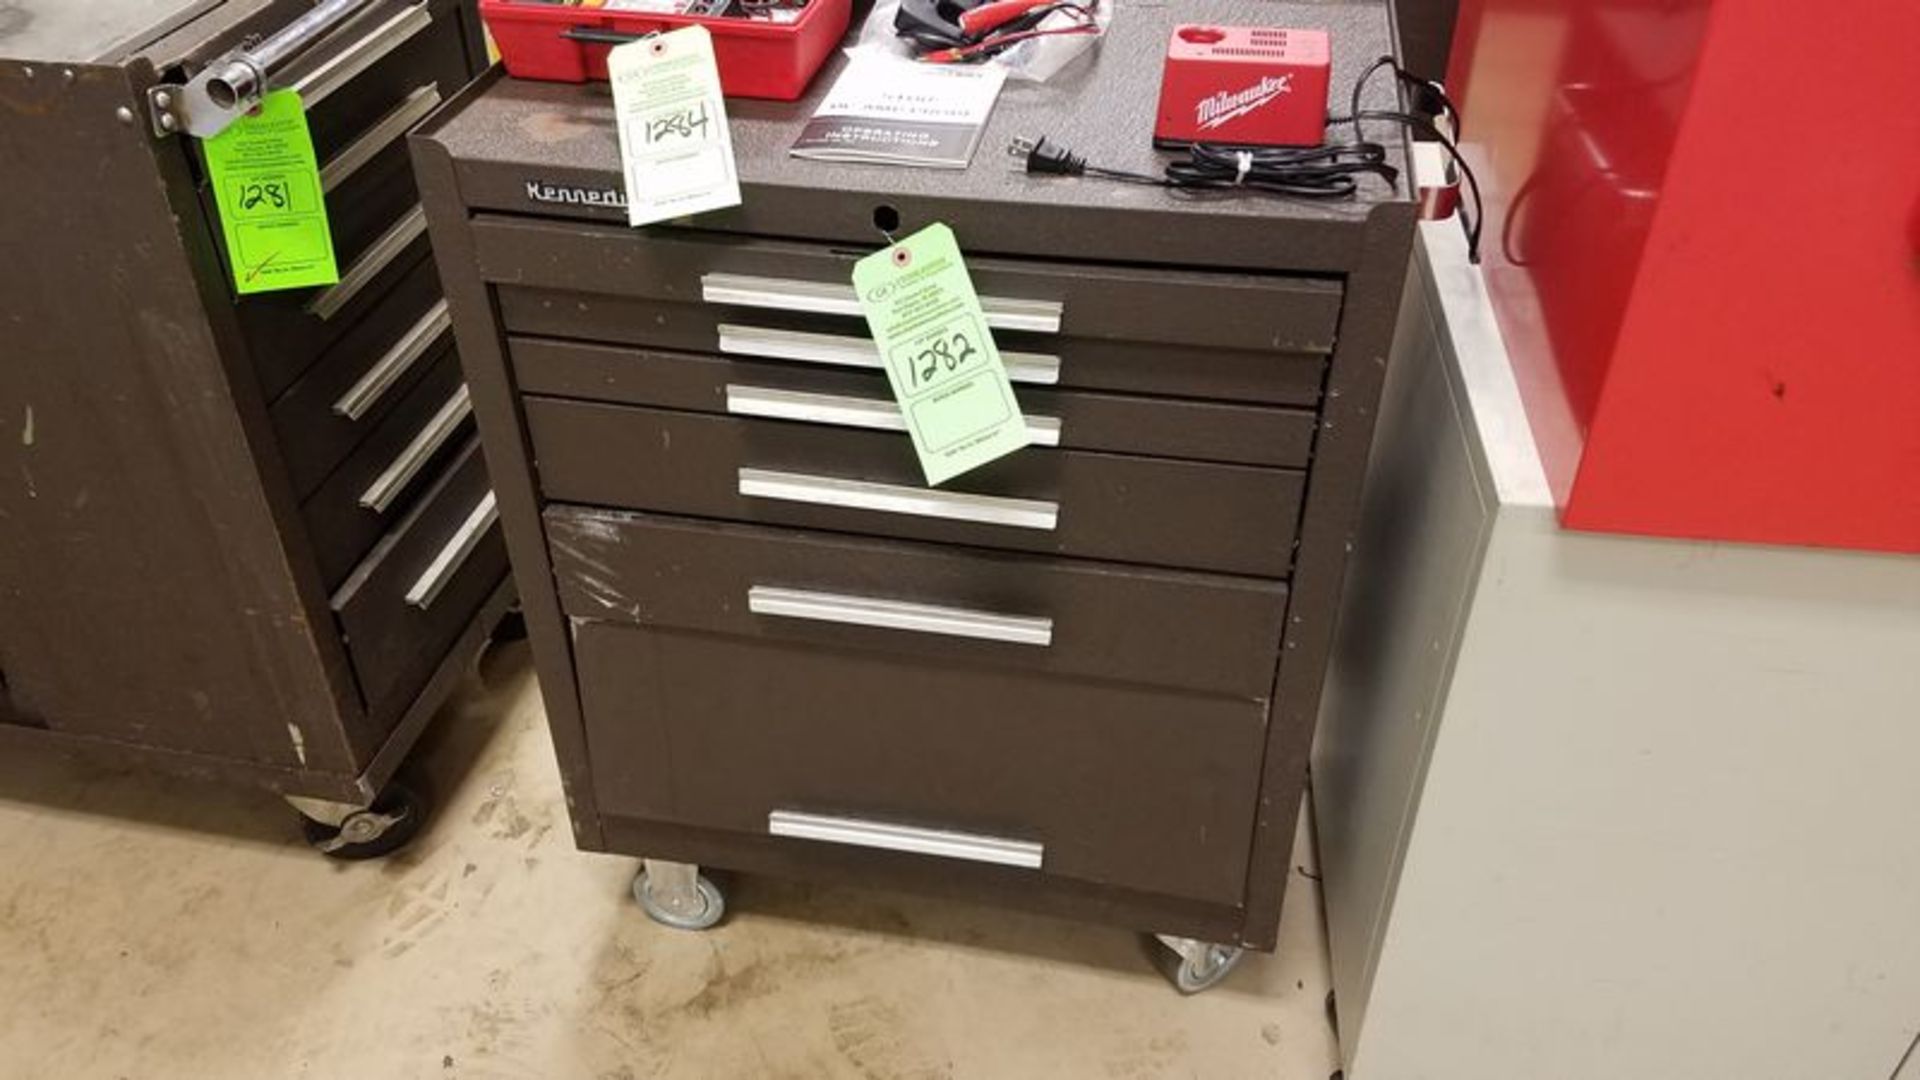 KENNEDY TOOL BOX 5-DRAWER; 1-DOOR (CONTENTS NOT INCLUDED)(LOCATED AT 627 HARTZELL ROAD NEW HAVEN